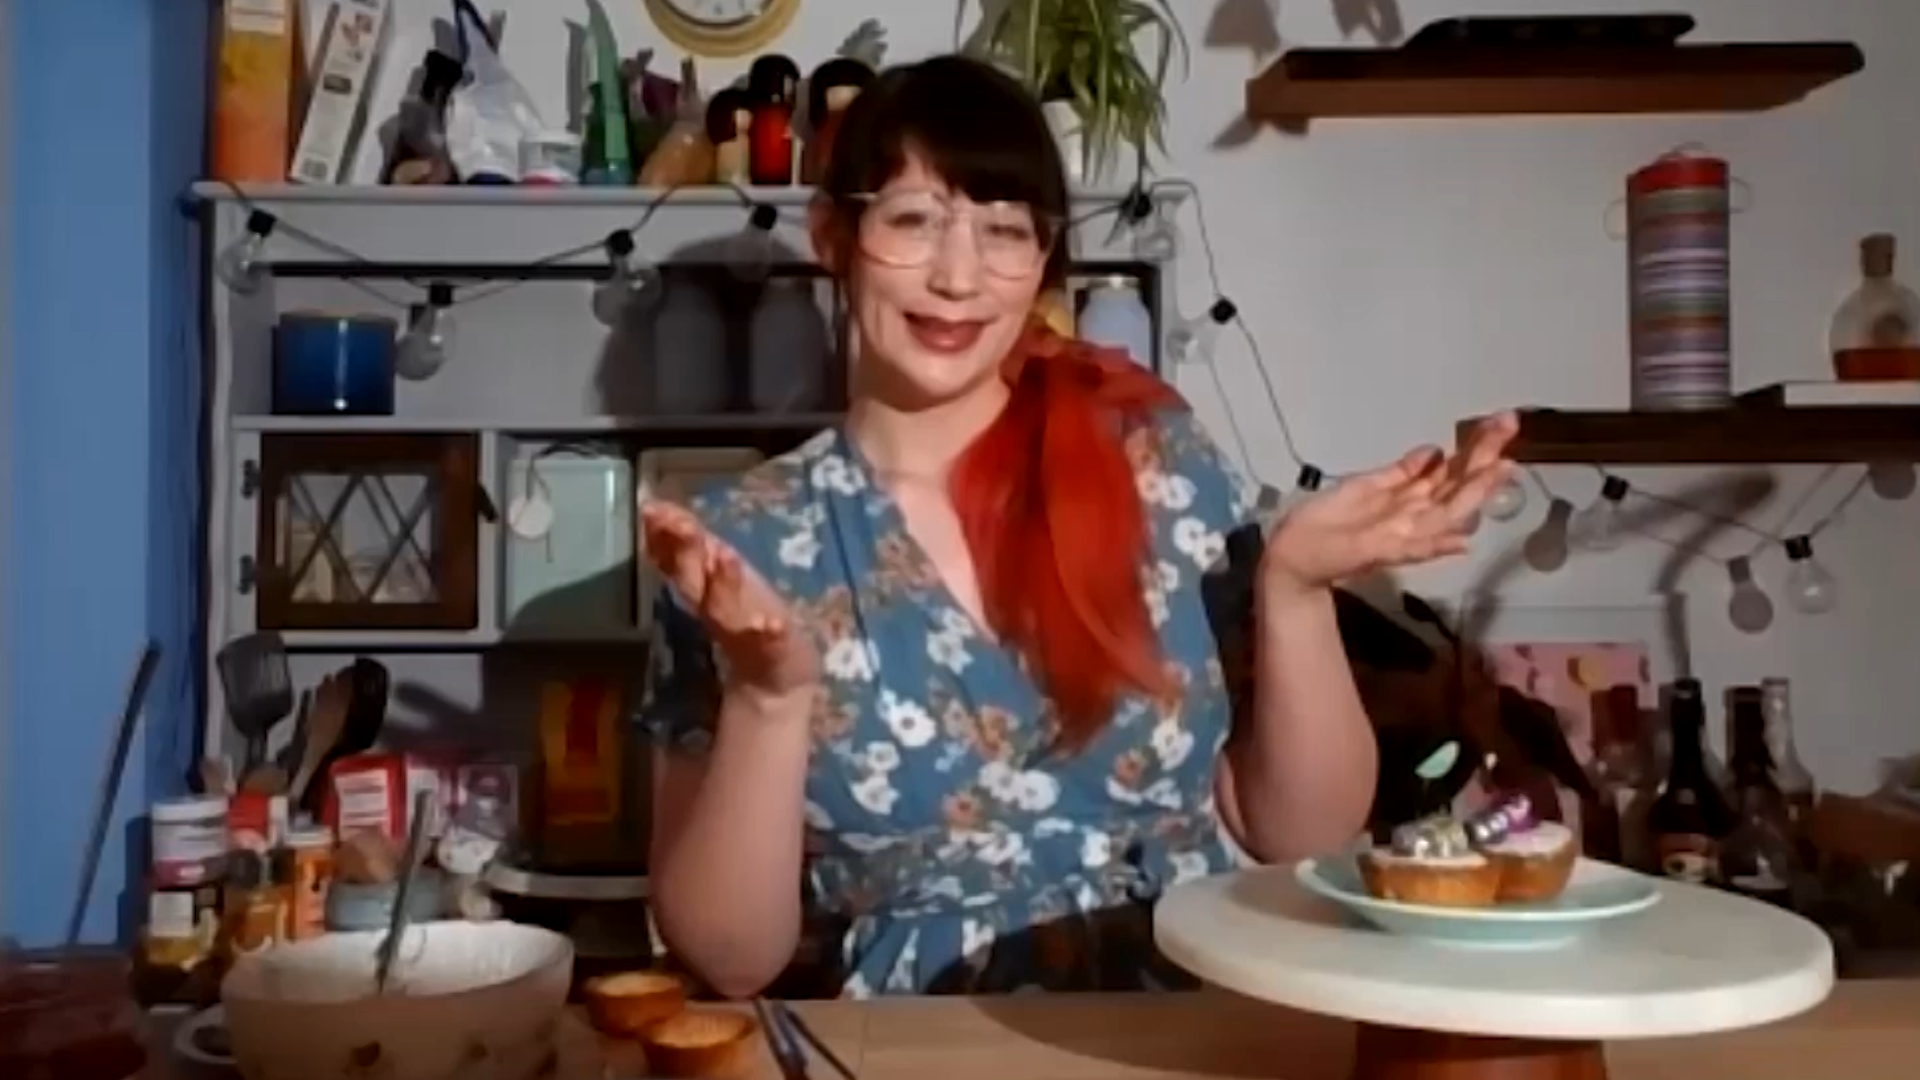 The Great British Bake Off's Kim-Joy puts a Valentine's Day spin on her Bakewell Tart recipe